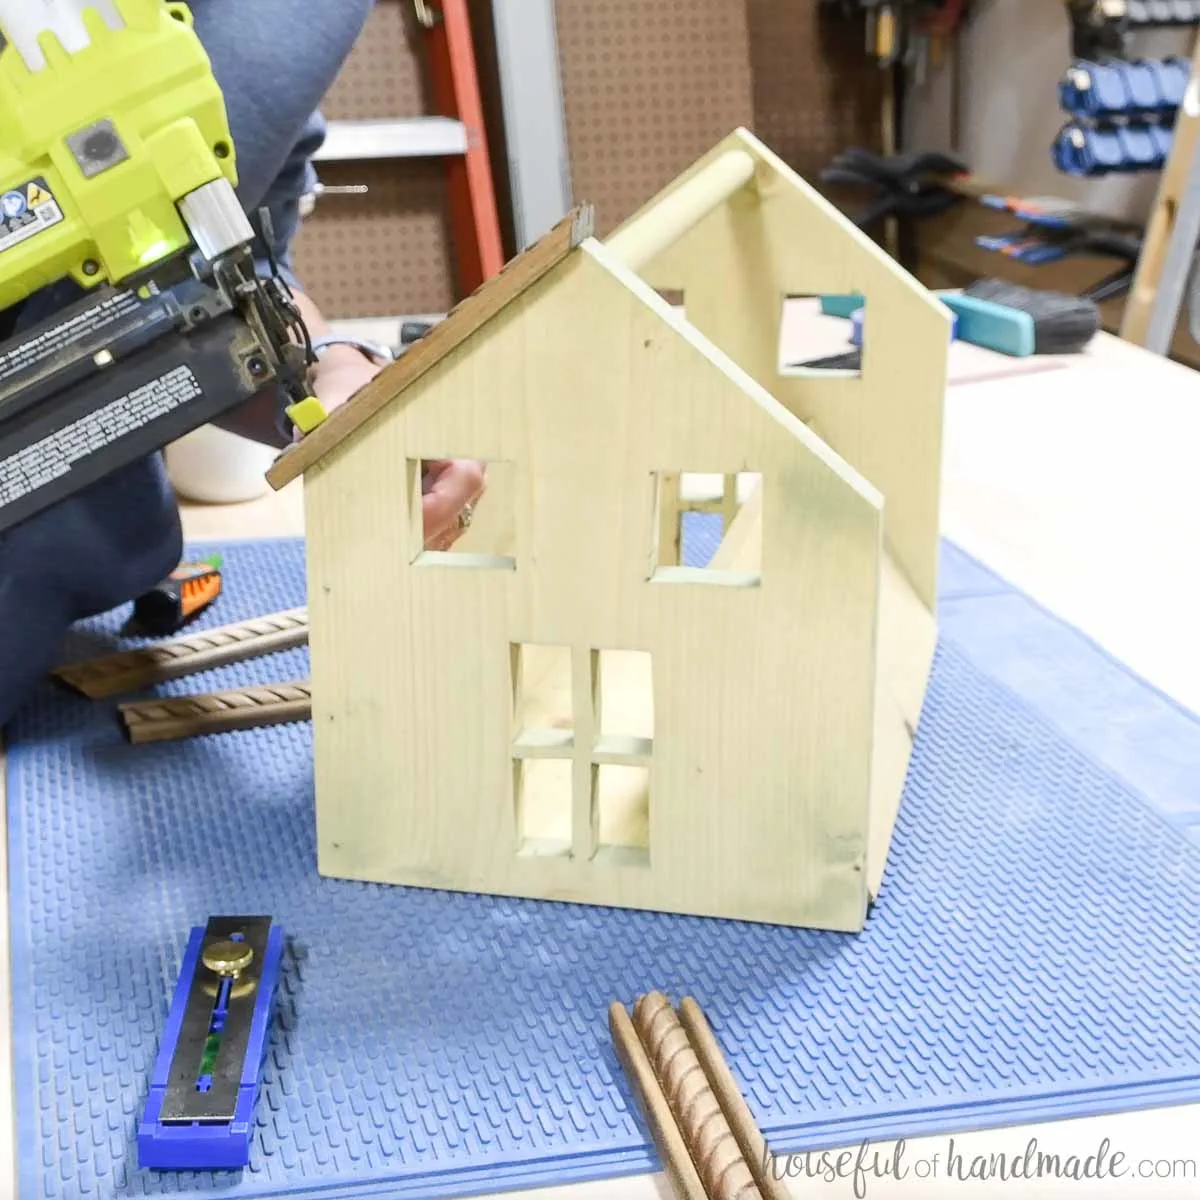 Nailing the roof pieces to the top of the dollhouse tote.